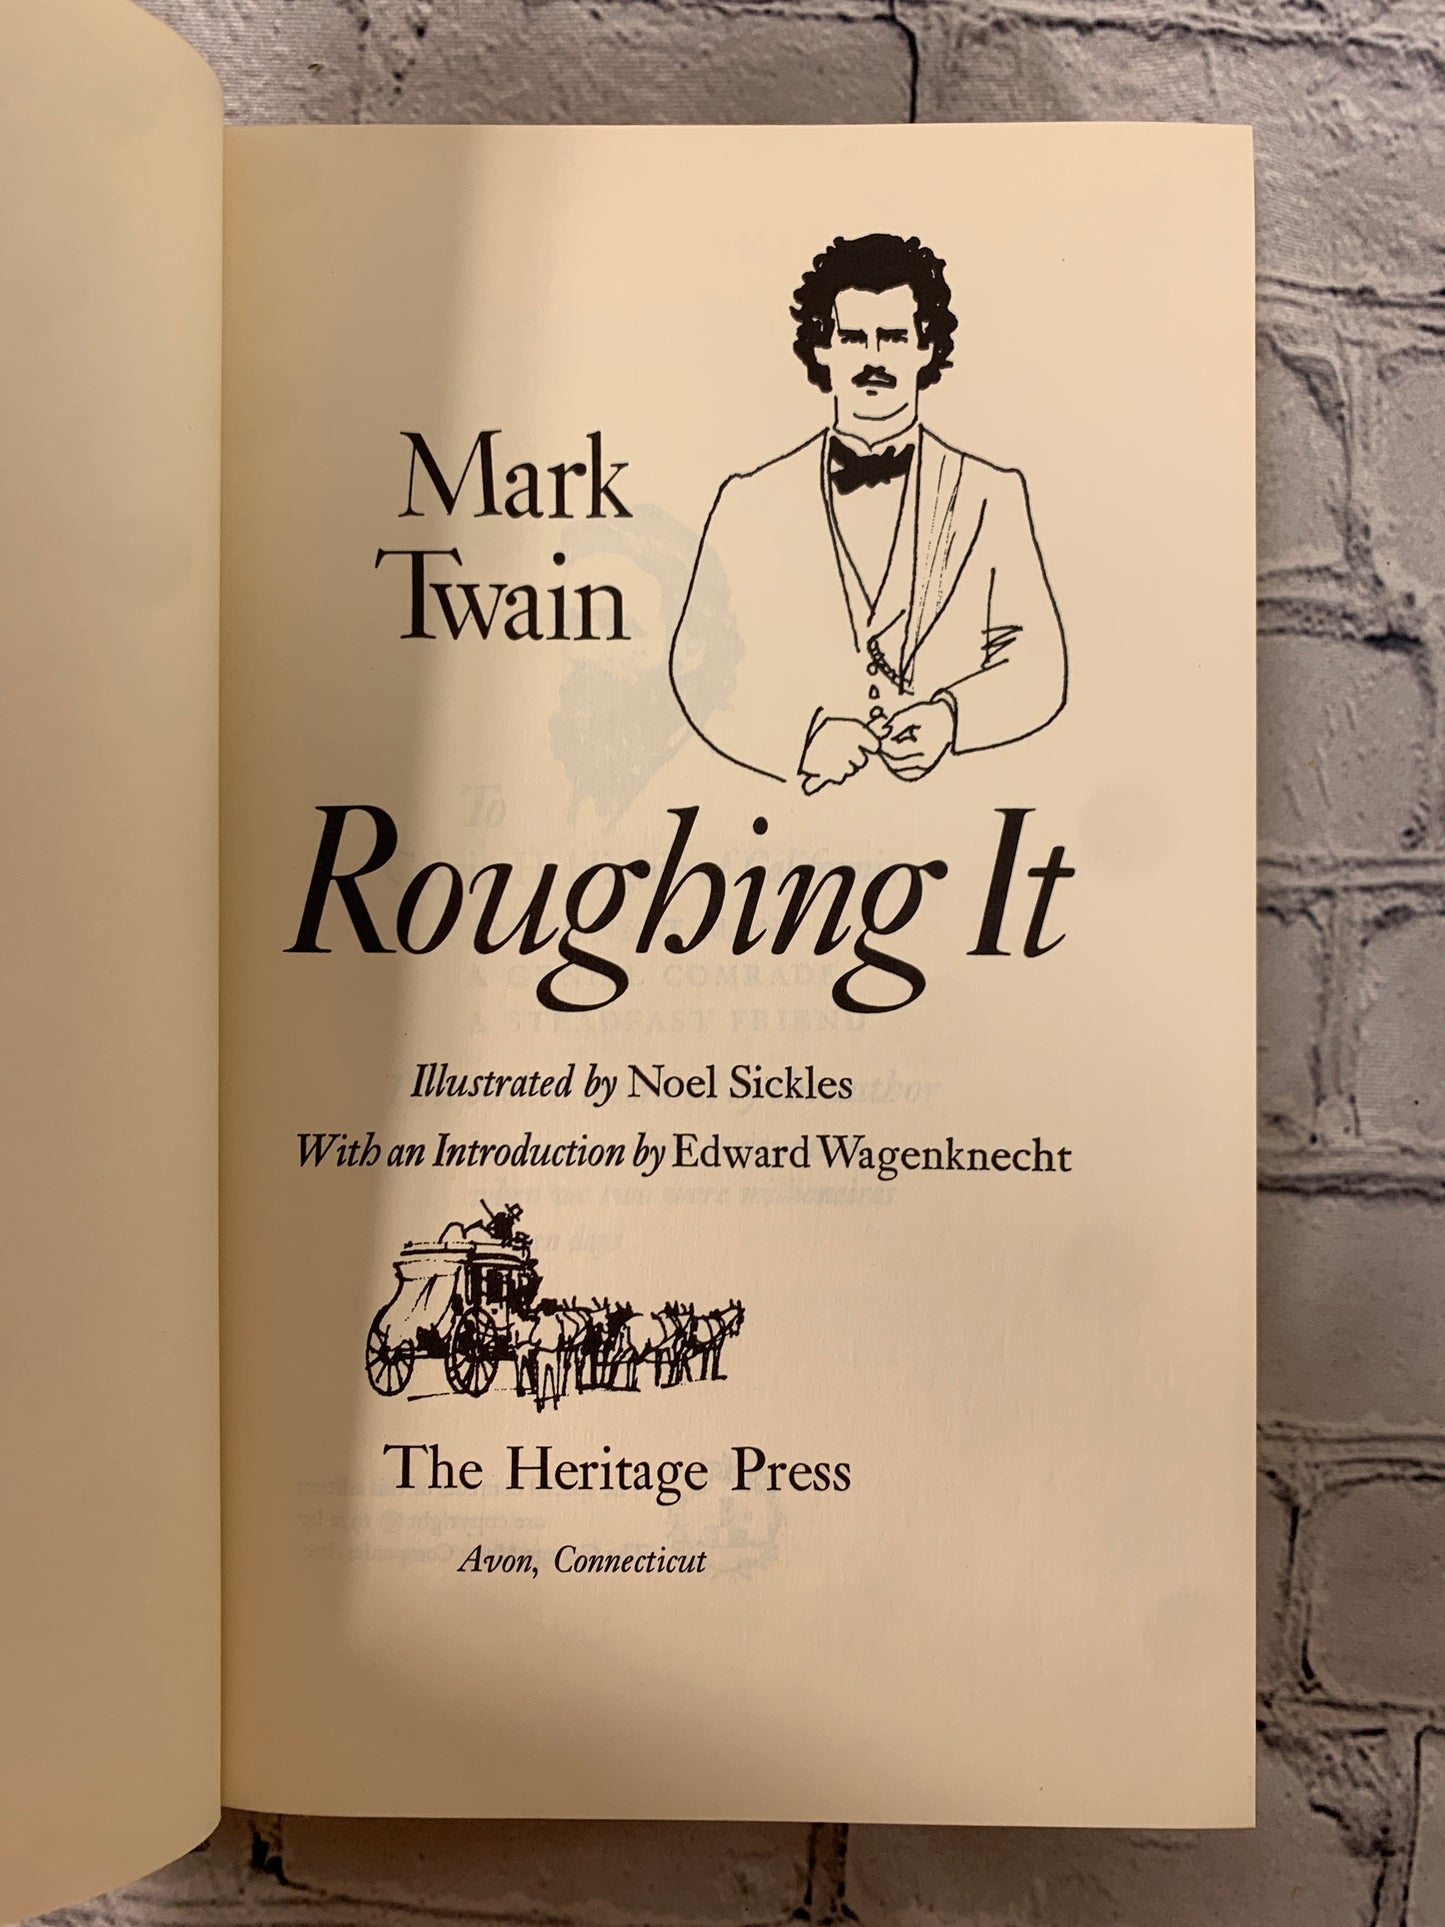 Roughing It by Mark Twain with Sandglass [1972]